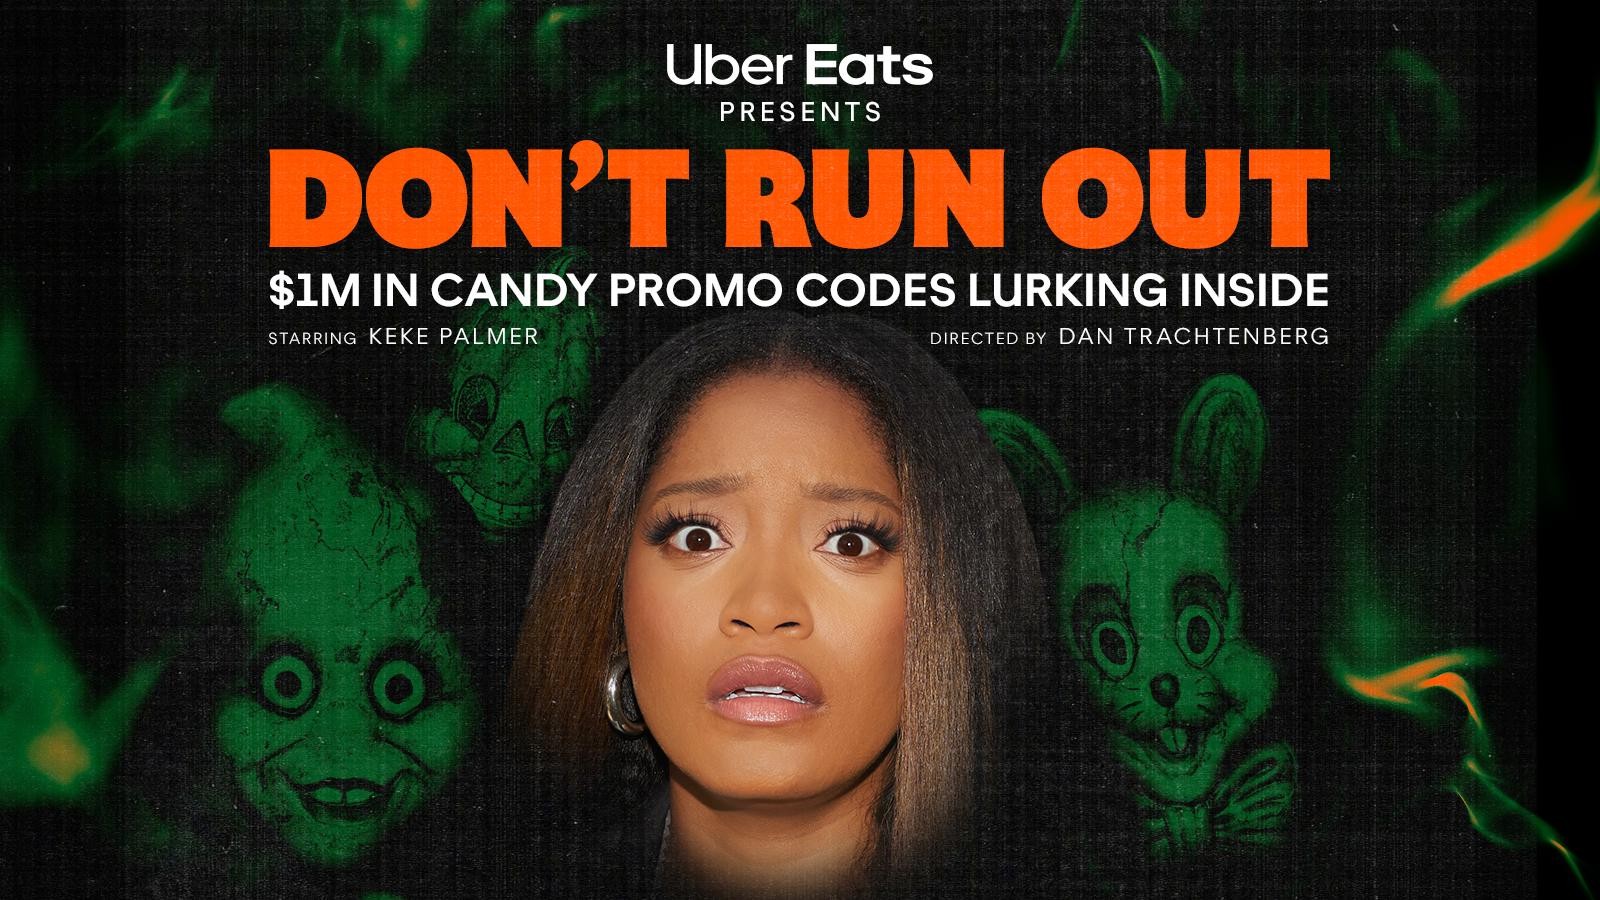 Uber Eats presents "Don't Run Out"